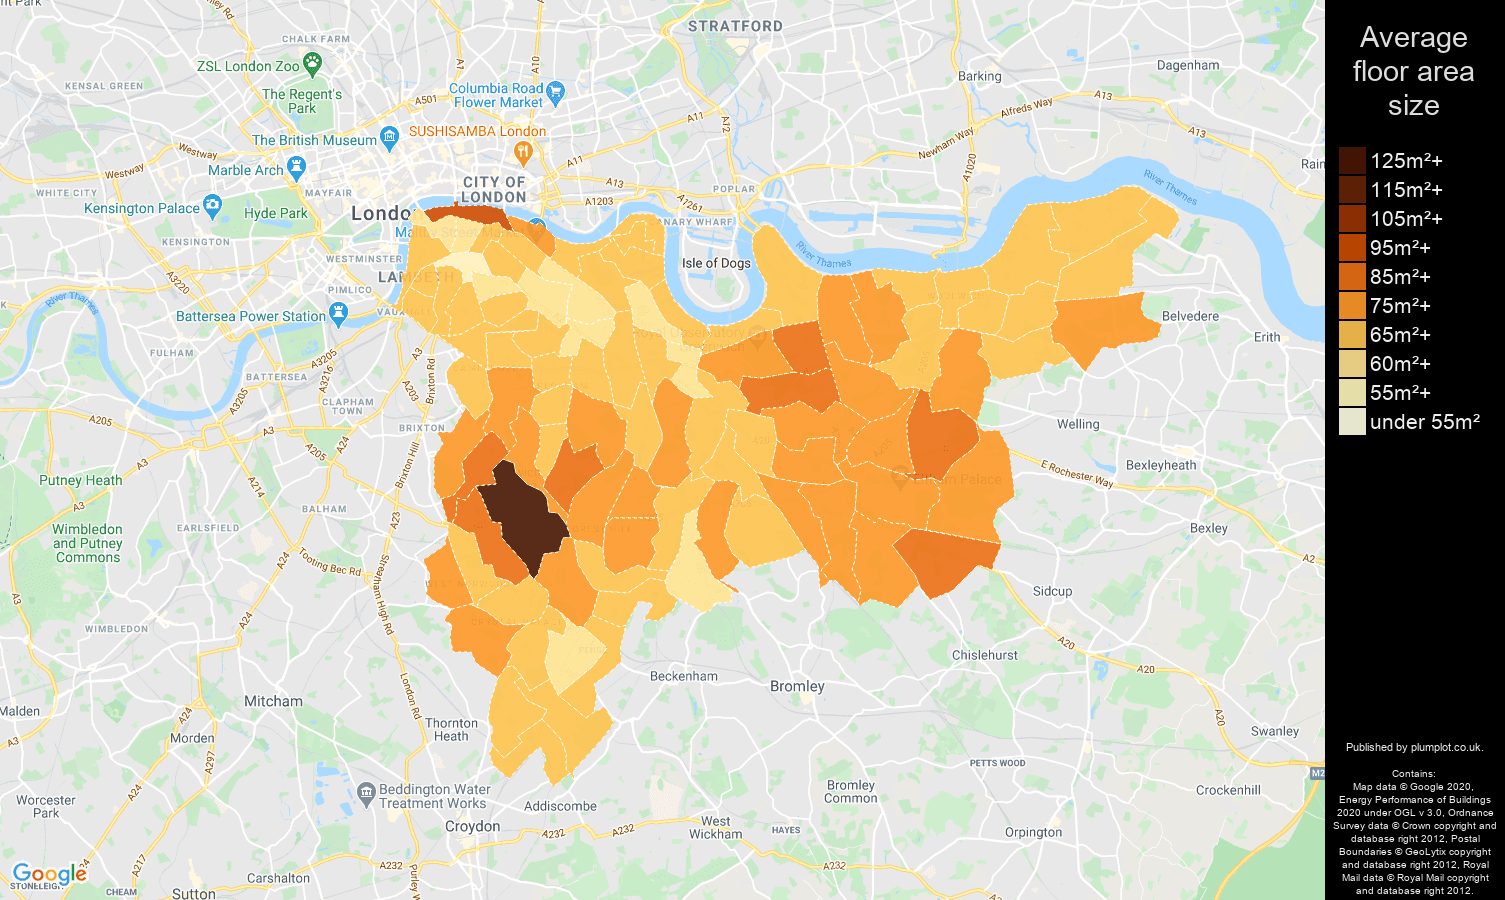 South East London map of average floor area size of properties